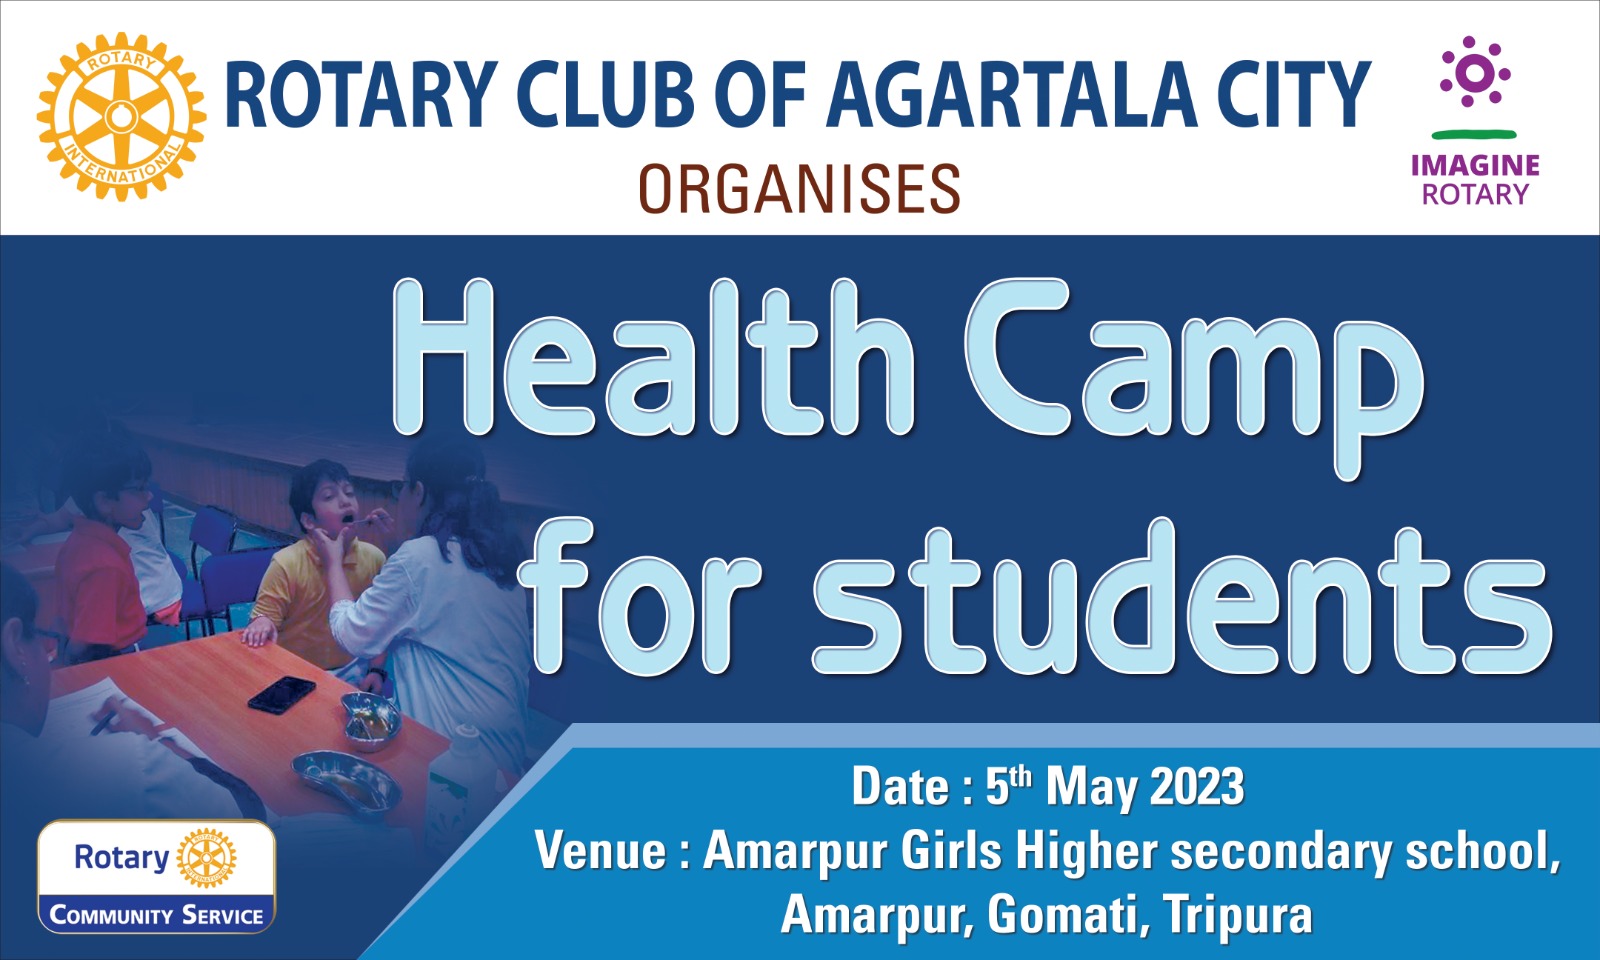 RCAC Health Camp for Students at Amarpur Girls’ Higher Secondary School, Amarpur, Gomati on 5th May, 2023.